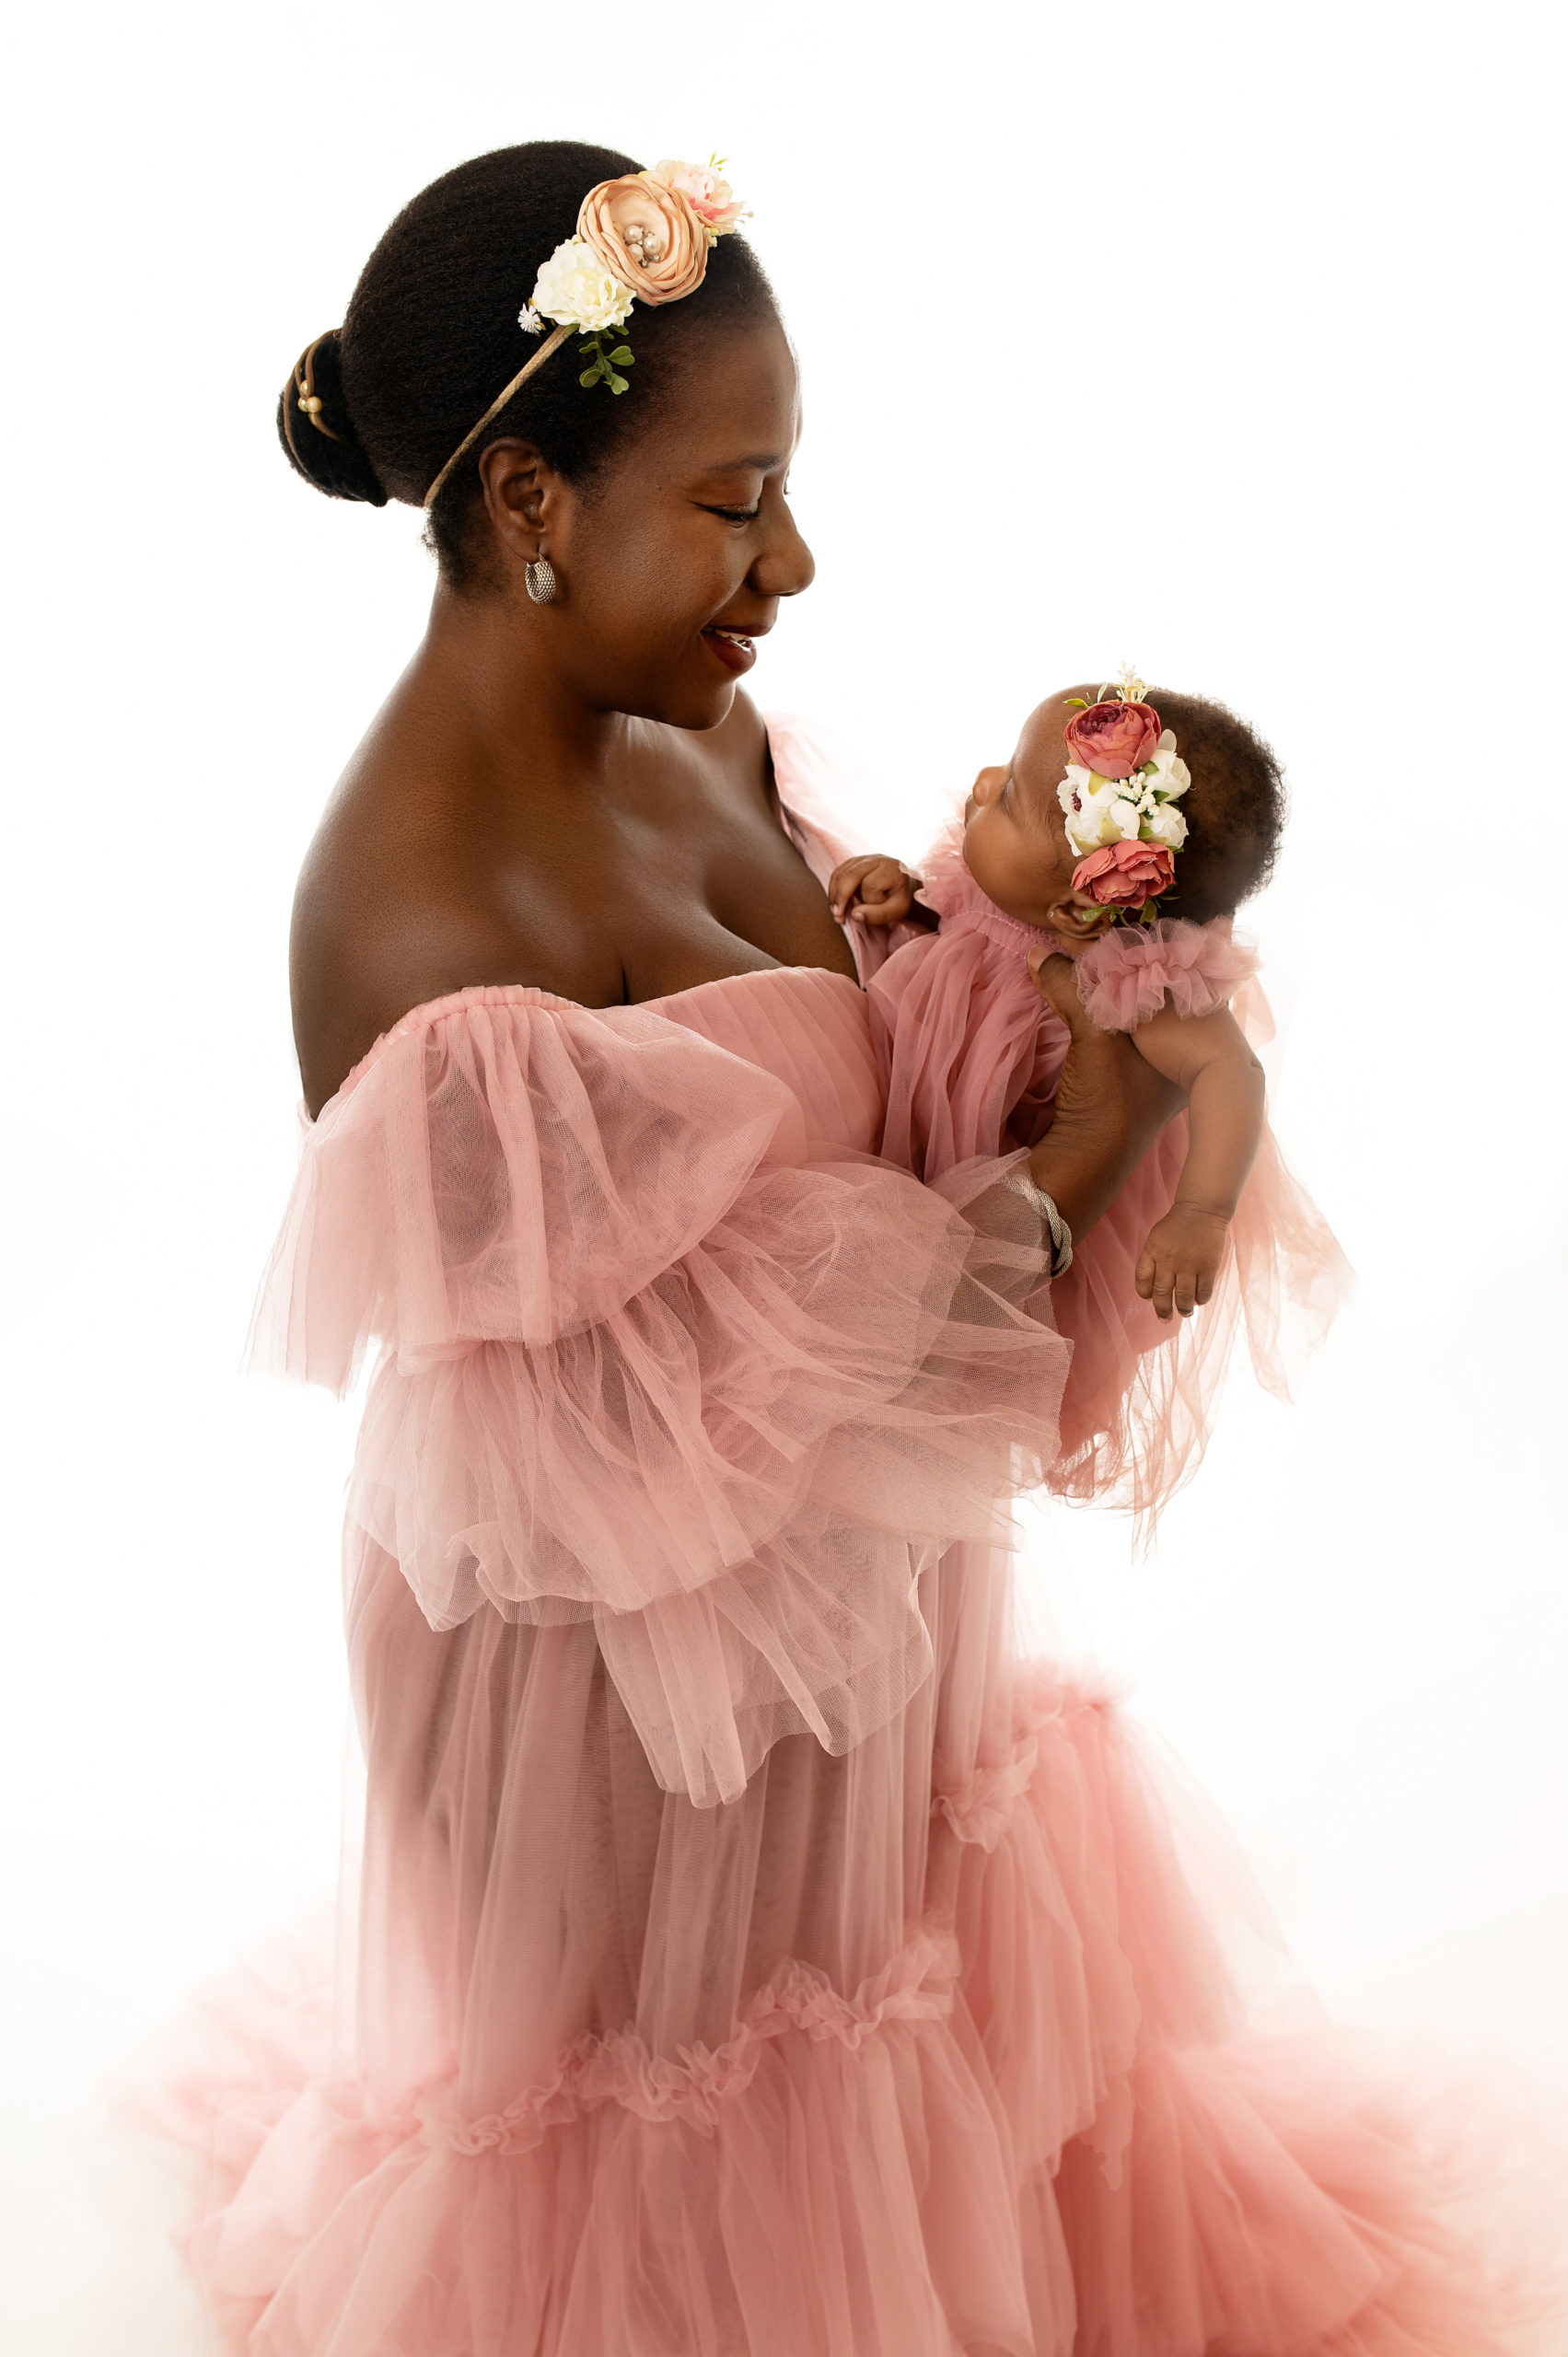 new mom in pink tulle dress holding her newborn baby Kandiland league city